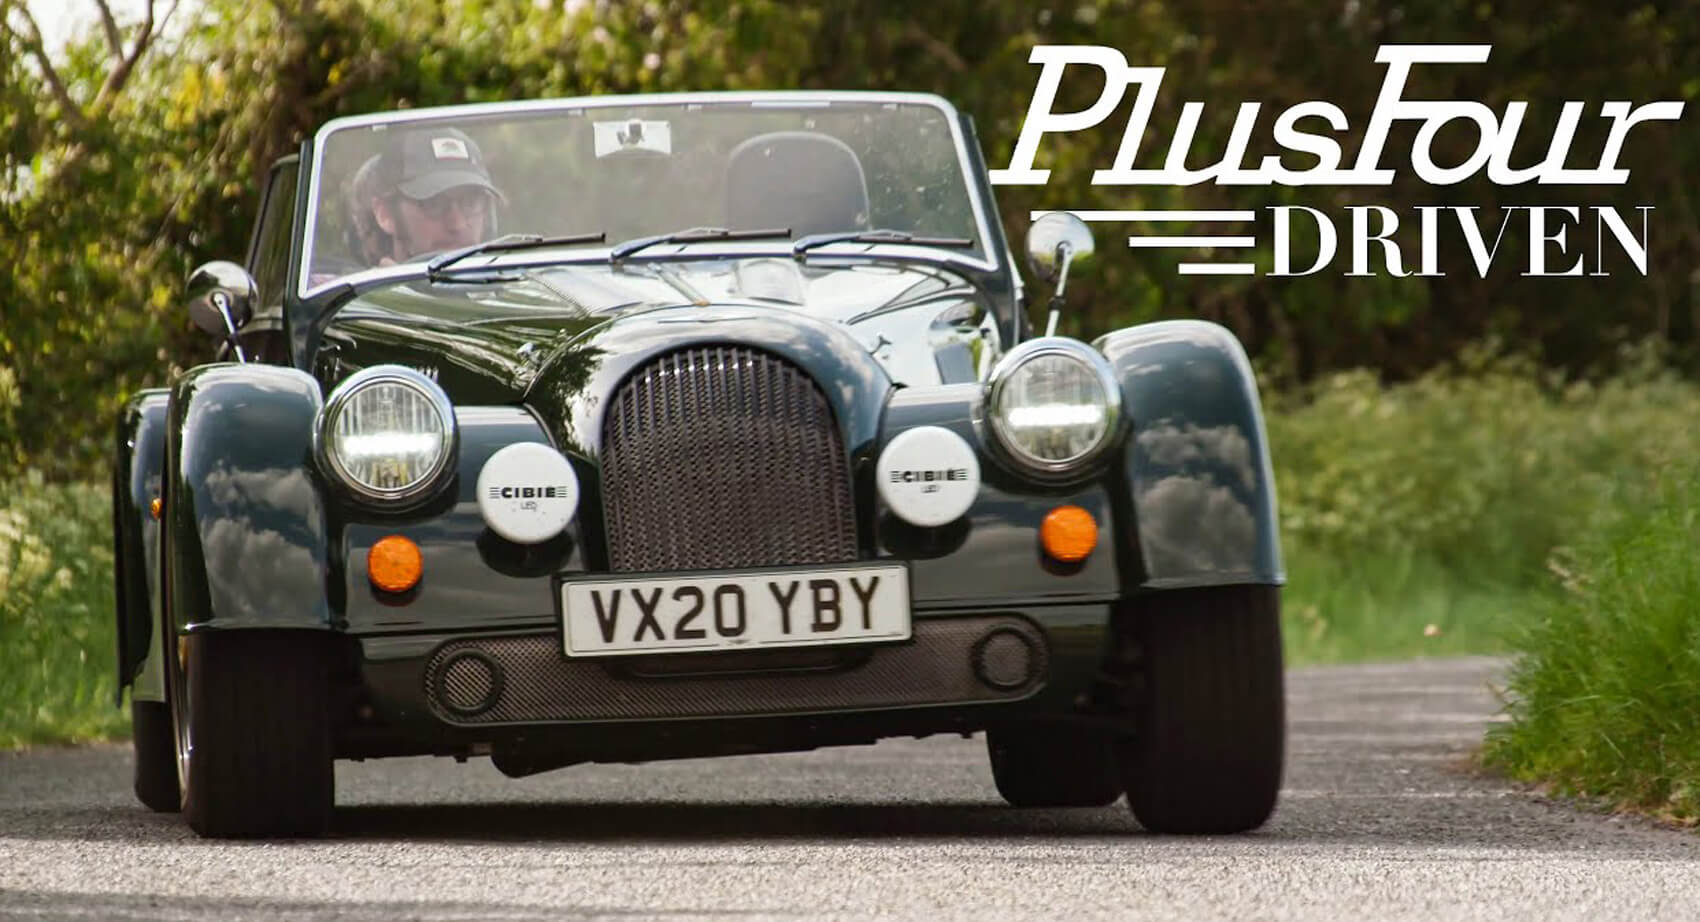 2020 Morgan Plus Four Is New But Still Retains The Brand's Classic Charm